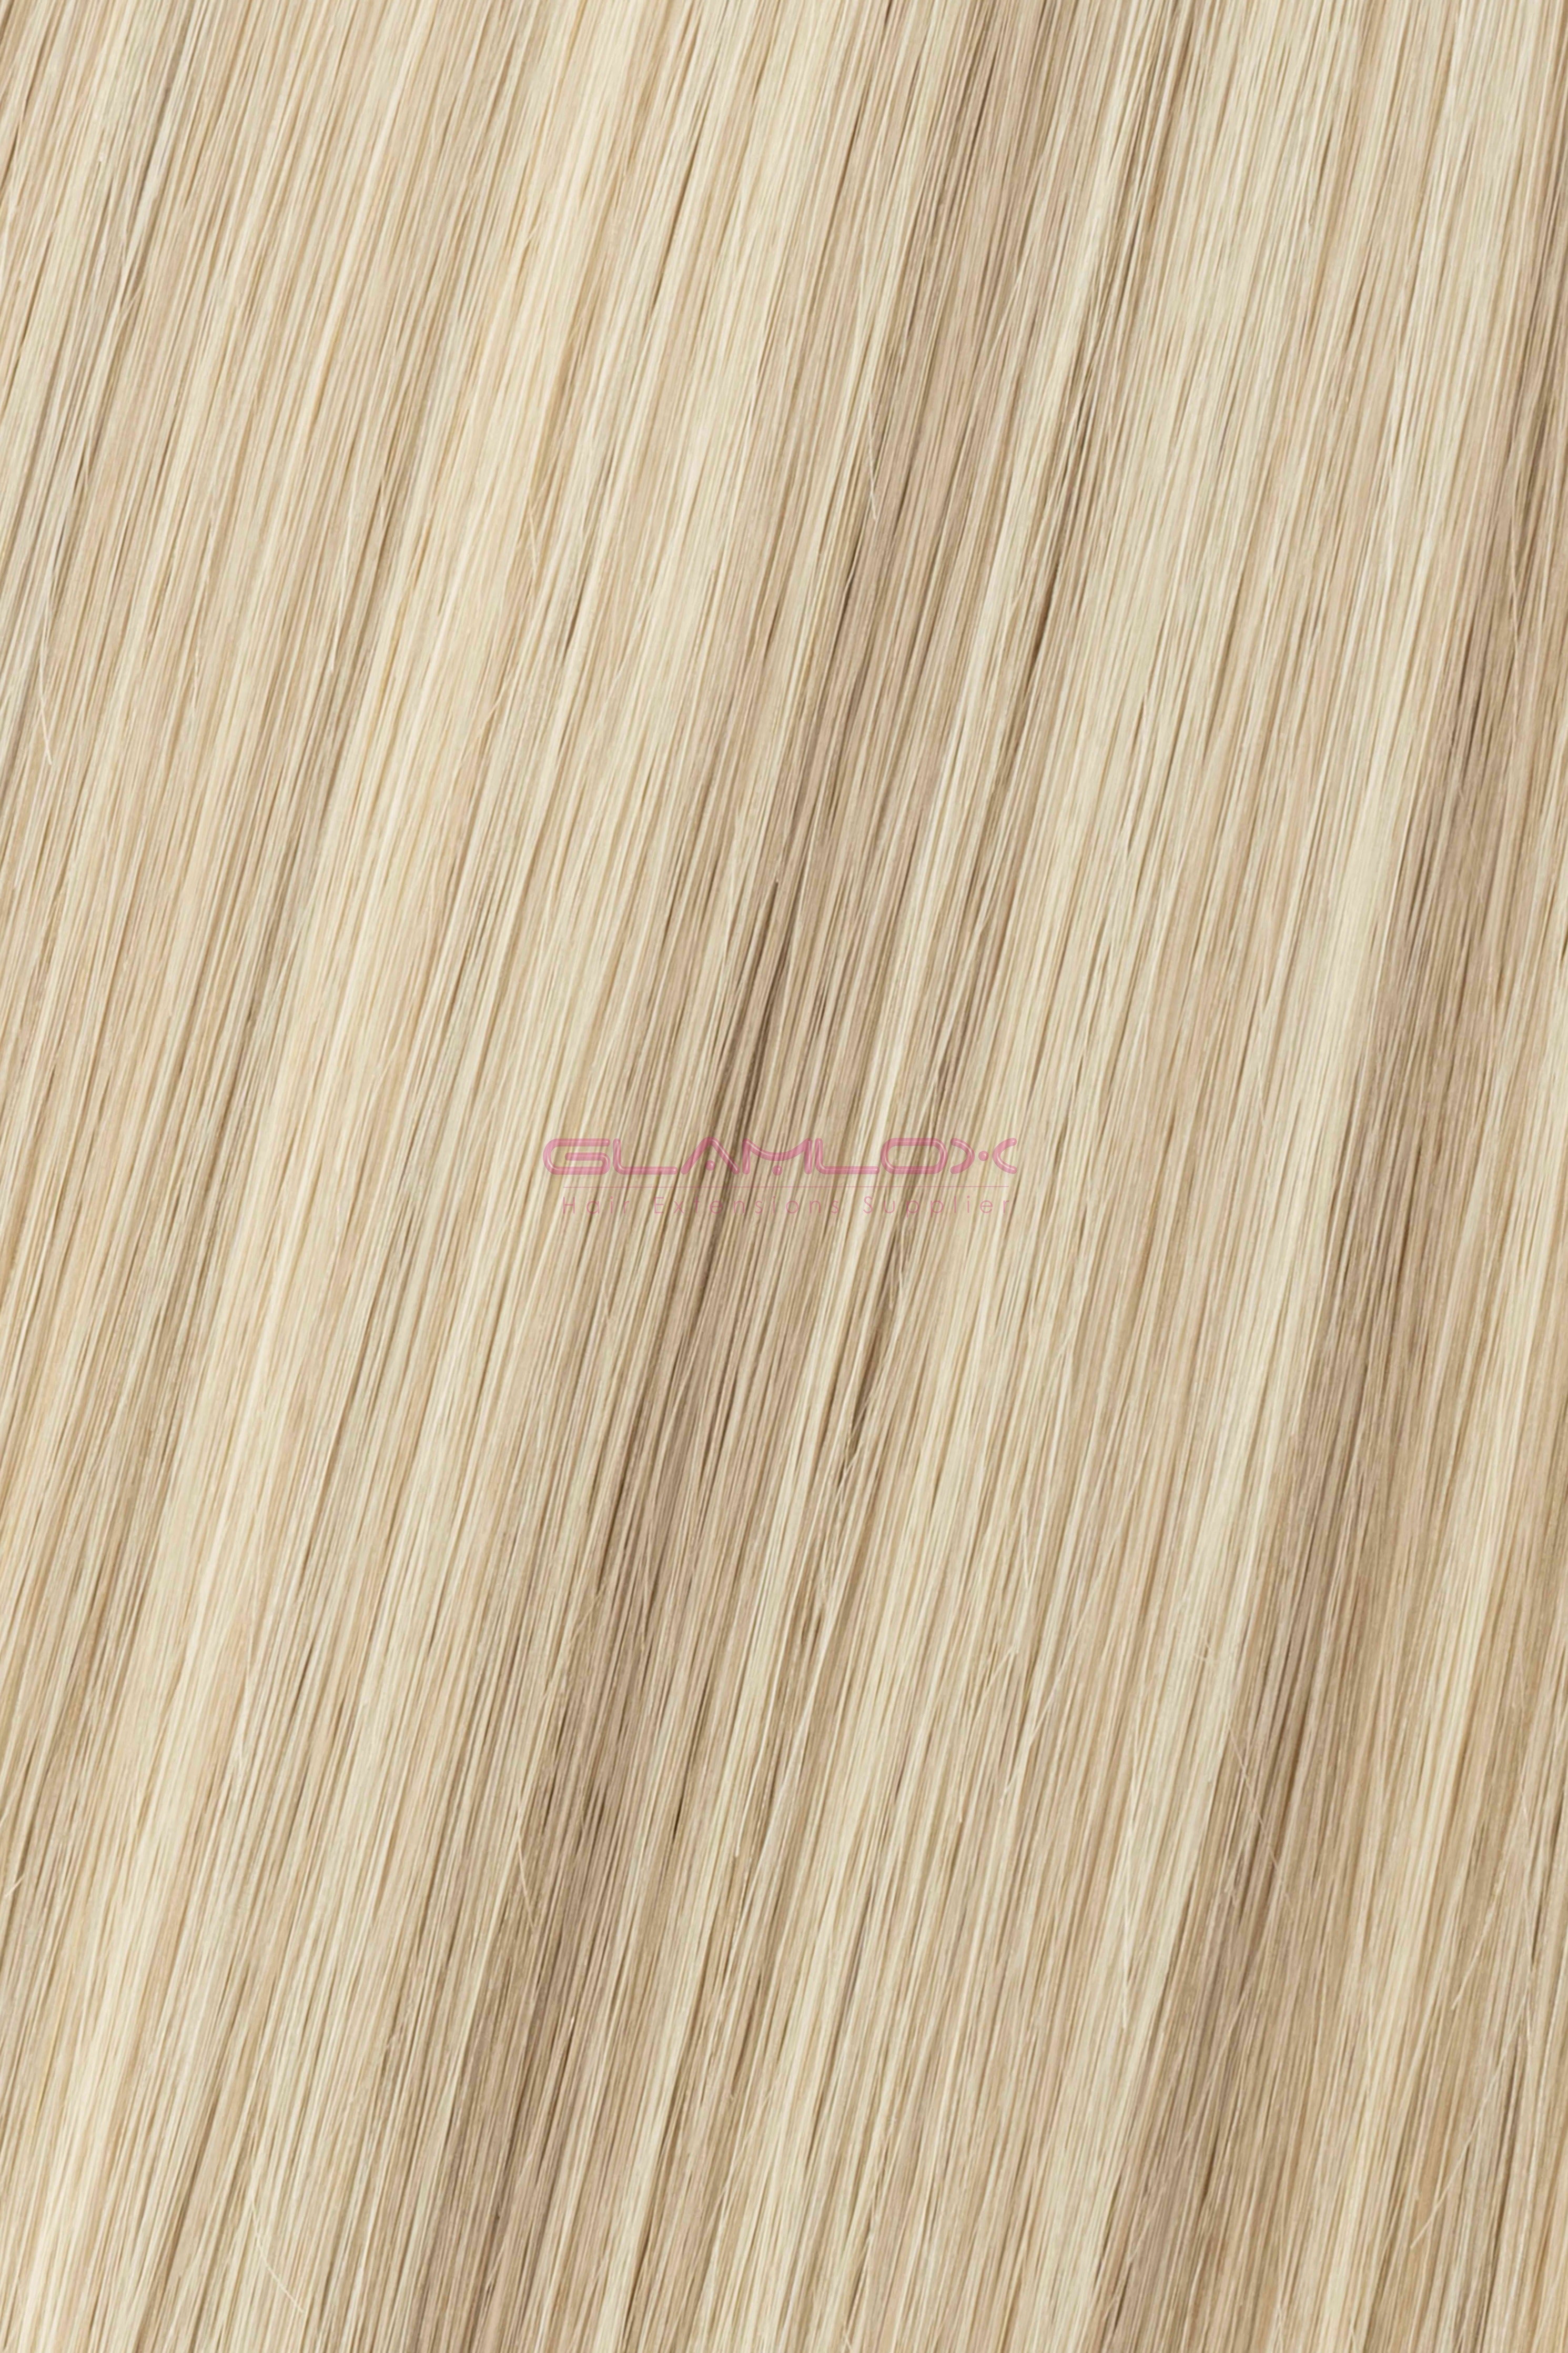 18" - 20" Mega Weft Hair Extensions 150G - Russian Mongolian Double Drawn Remy Human Hair